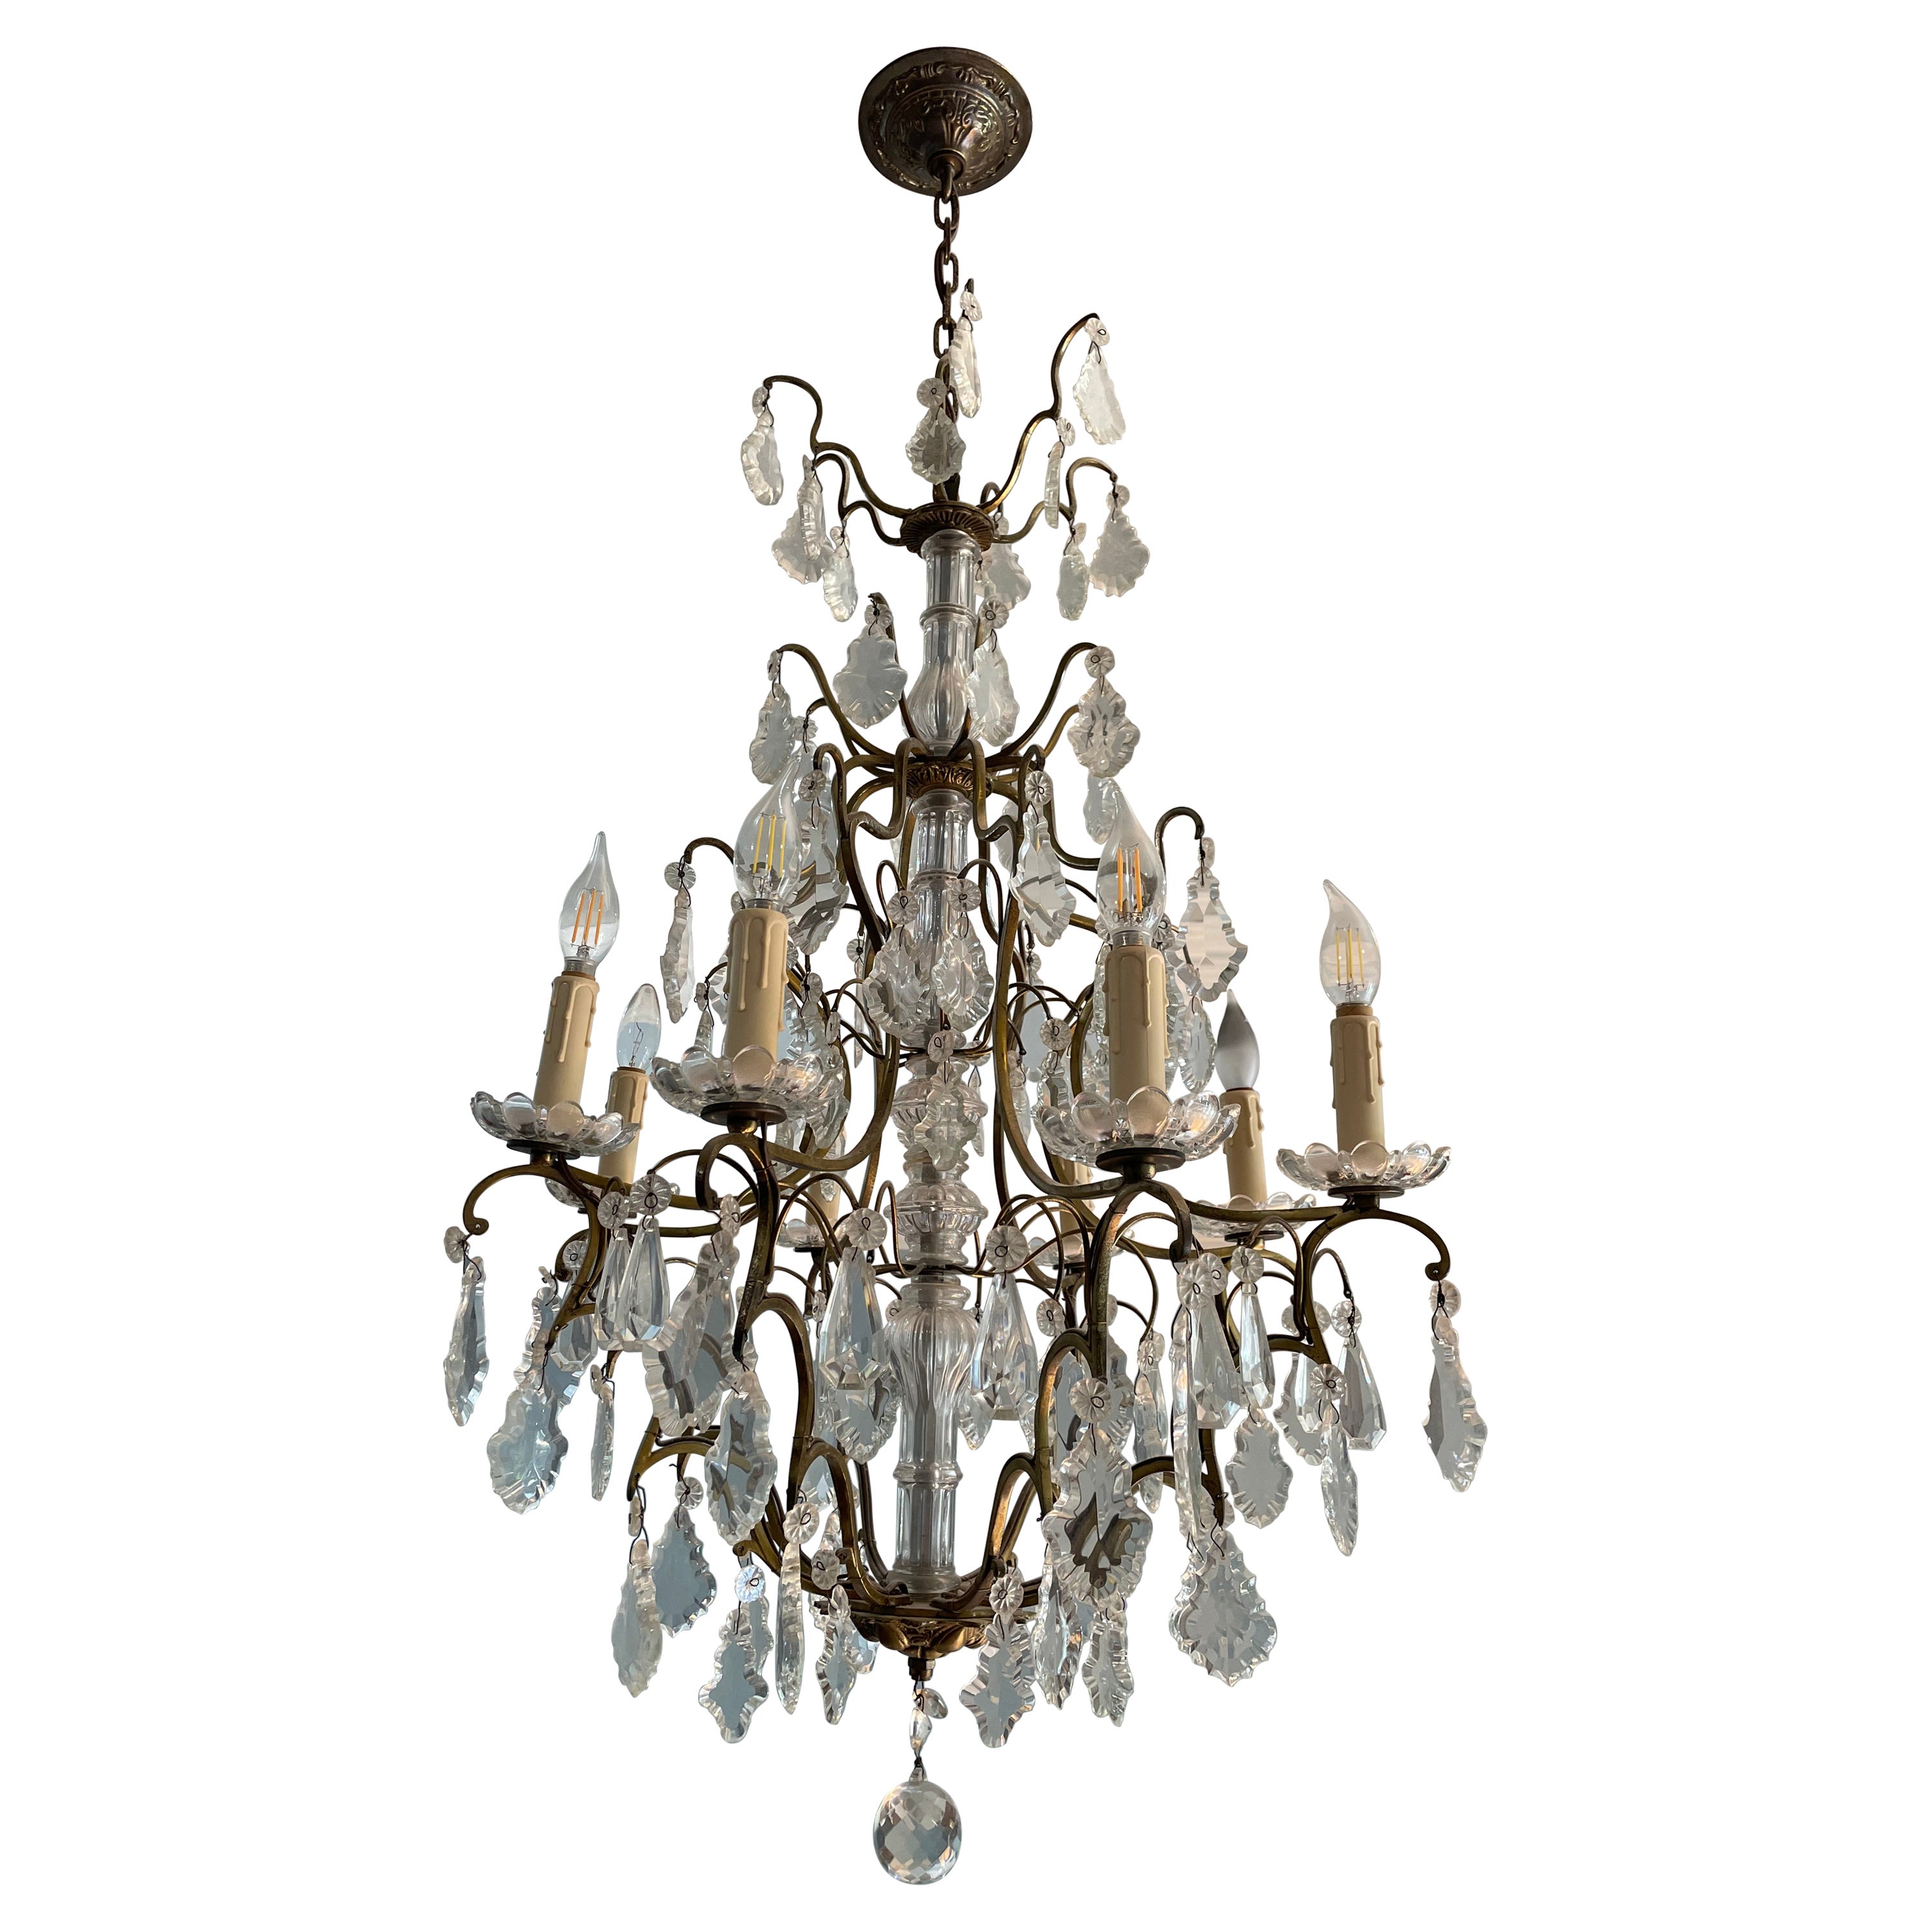 Antique 1920s French Louis XVI Gilt Bronze Crystal Chandelier For Sale